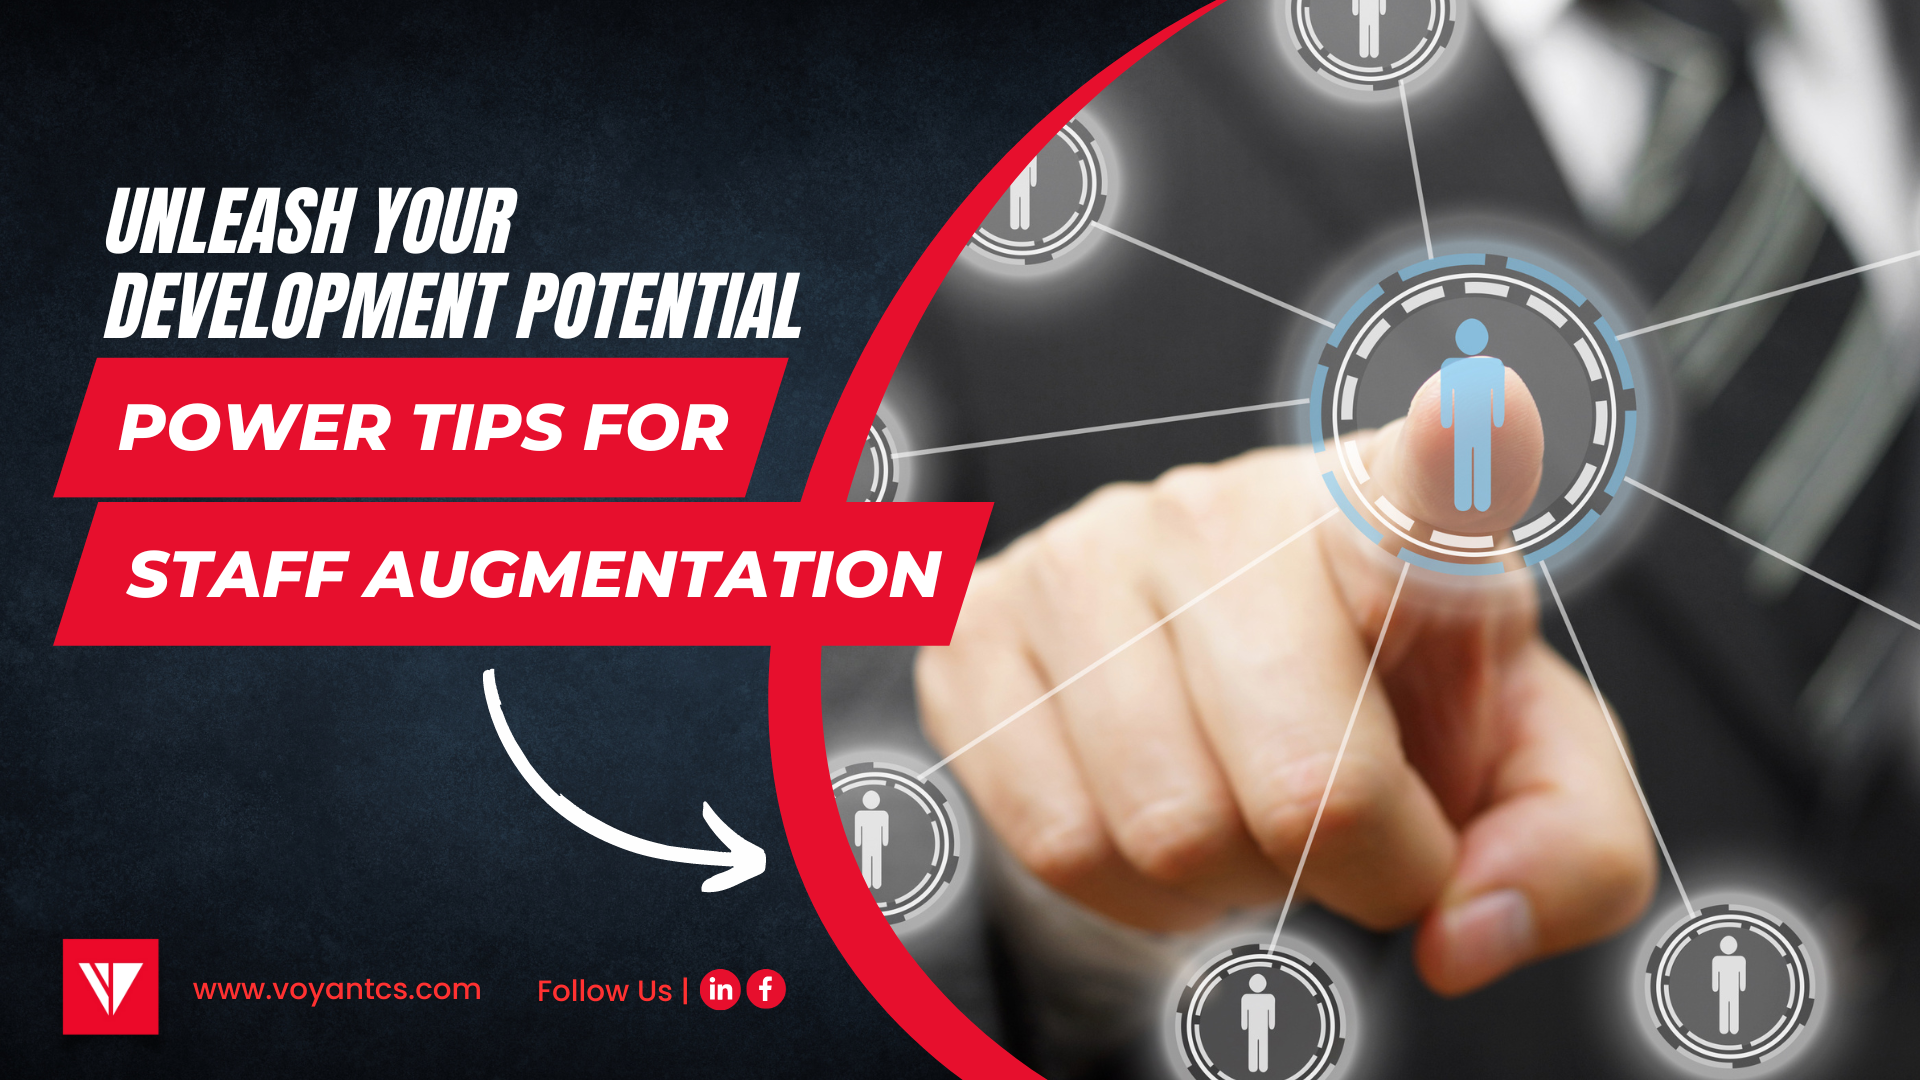 Unleash Your Development Potential: 7 Power Tips for Successful Staff Augmentation